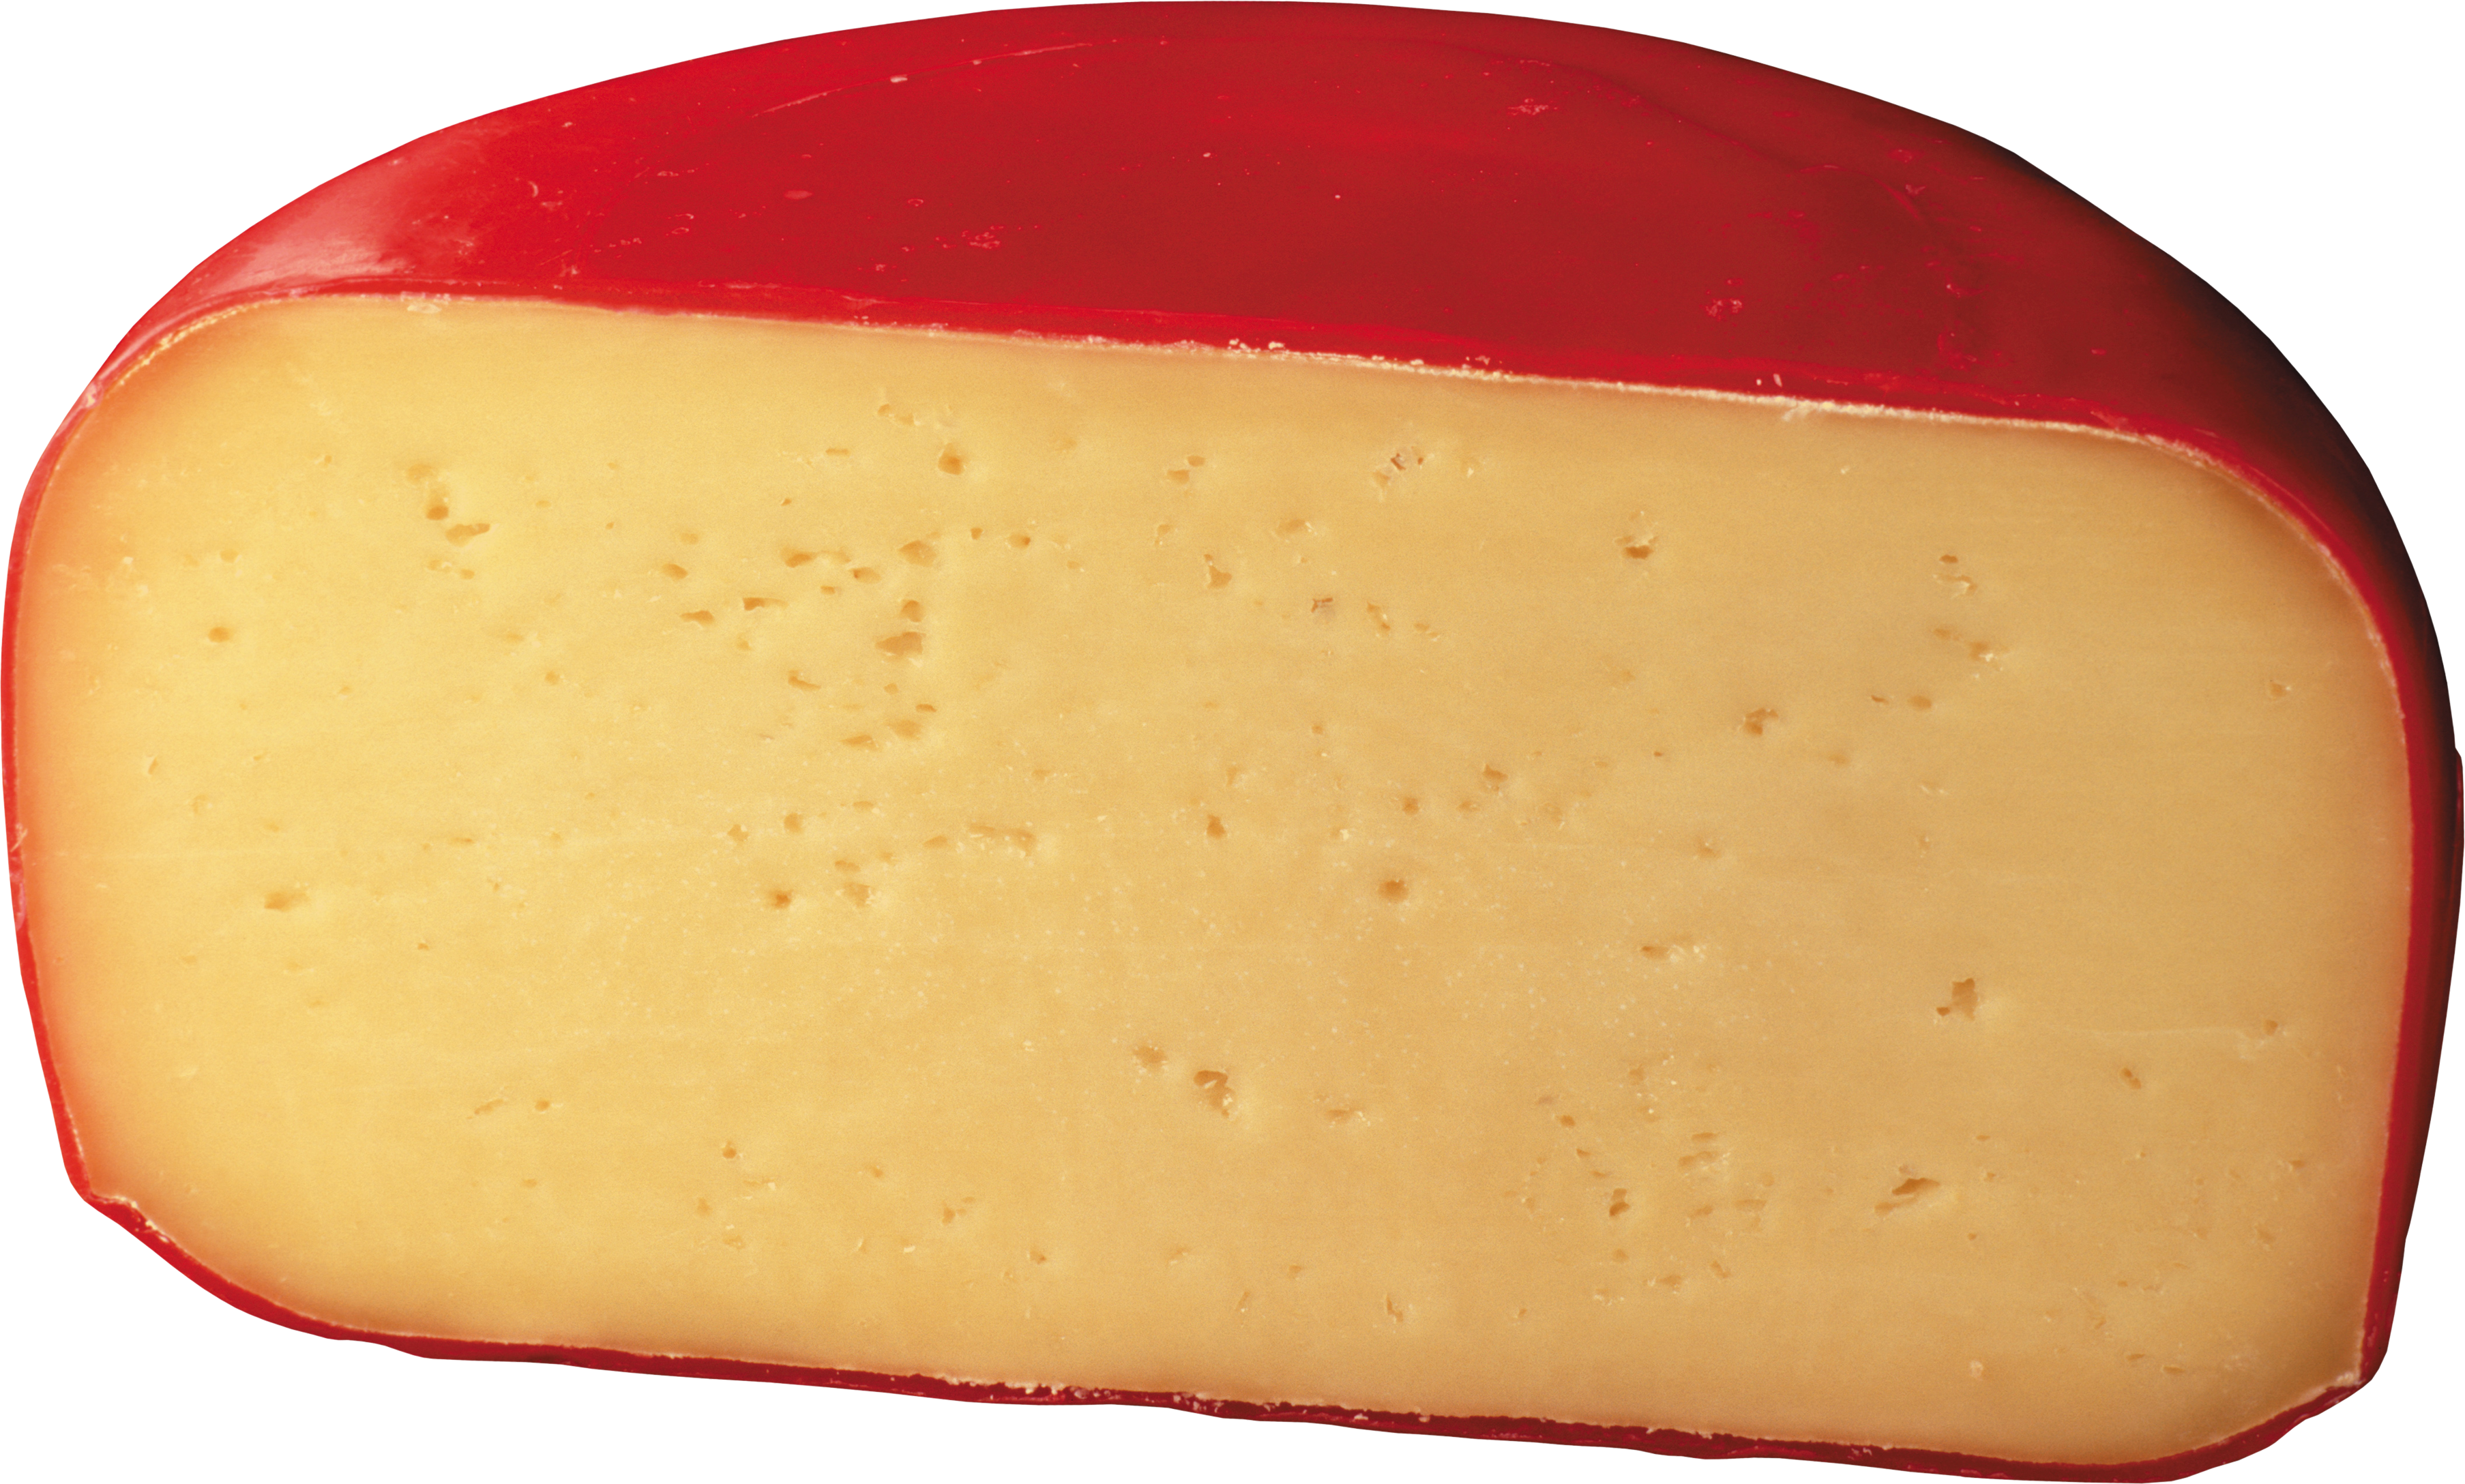 Cheese Png - Cheese, Transparent background PNG HD thumbnail